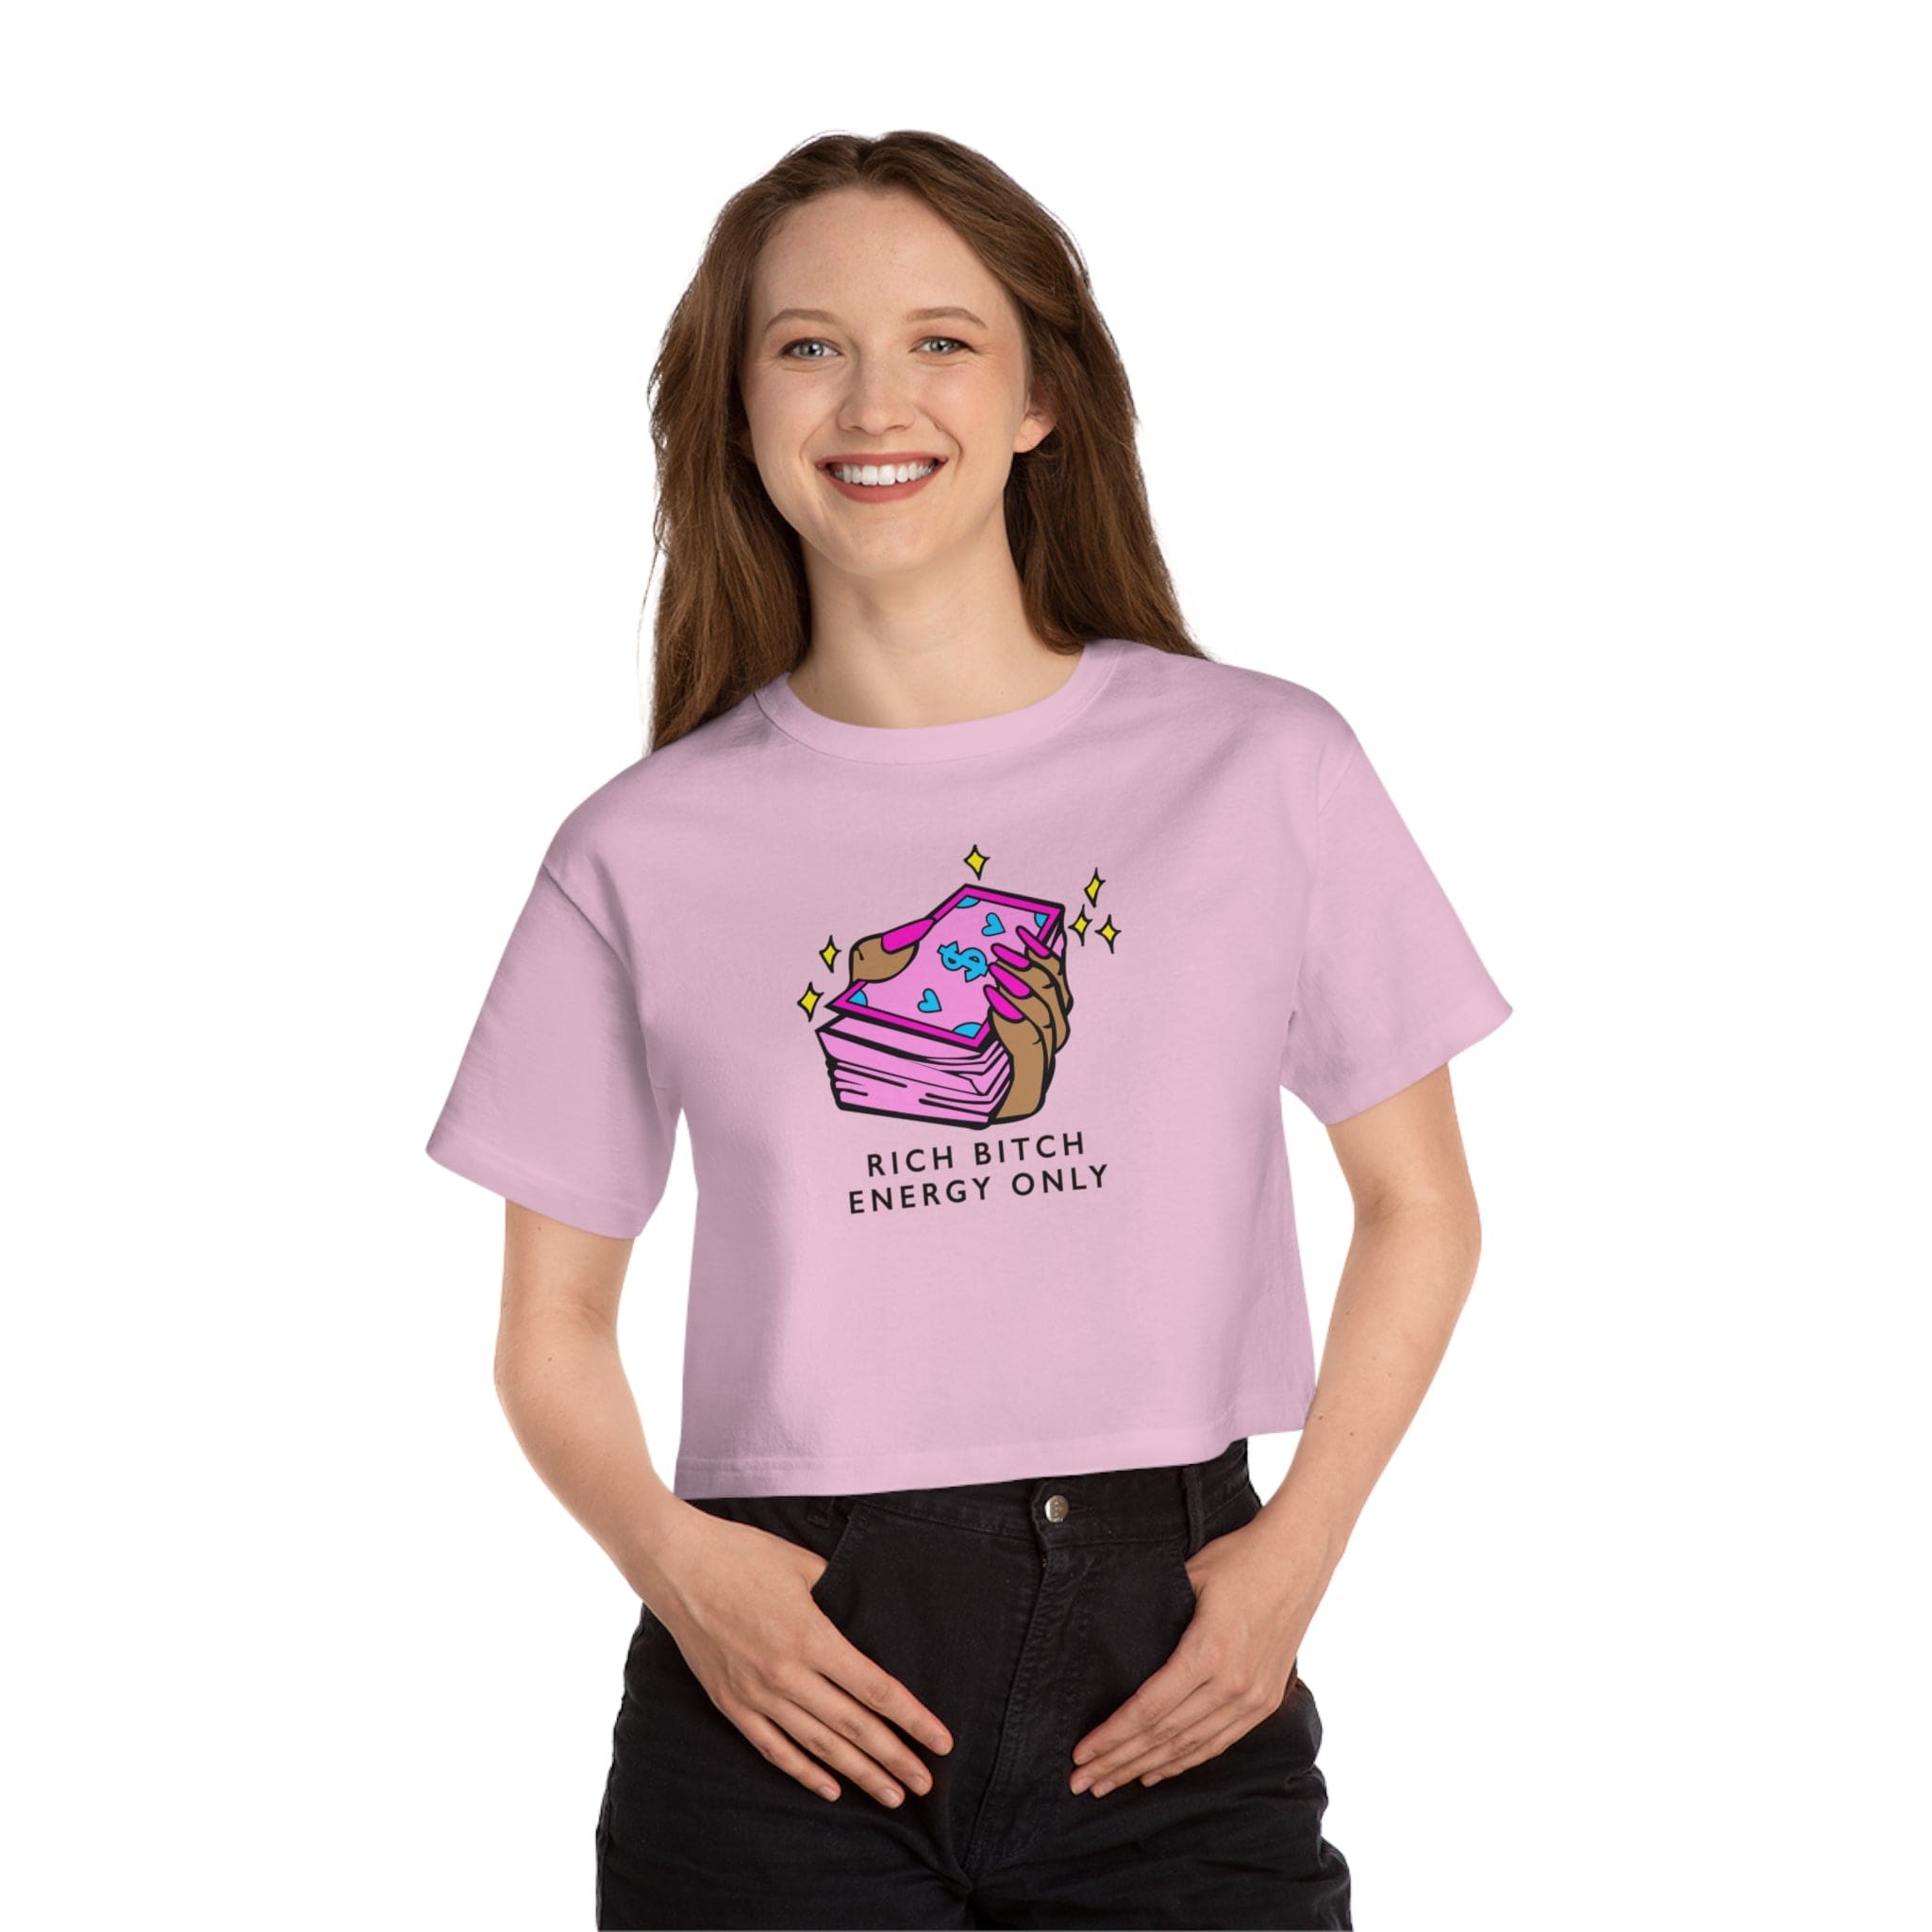 'RICH BITCH ENERGY ONLY" CROPPED T-SHIRT